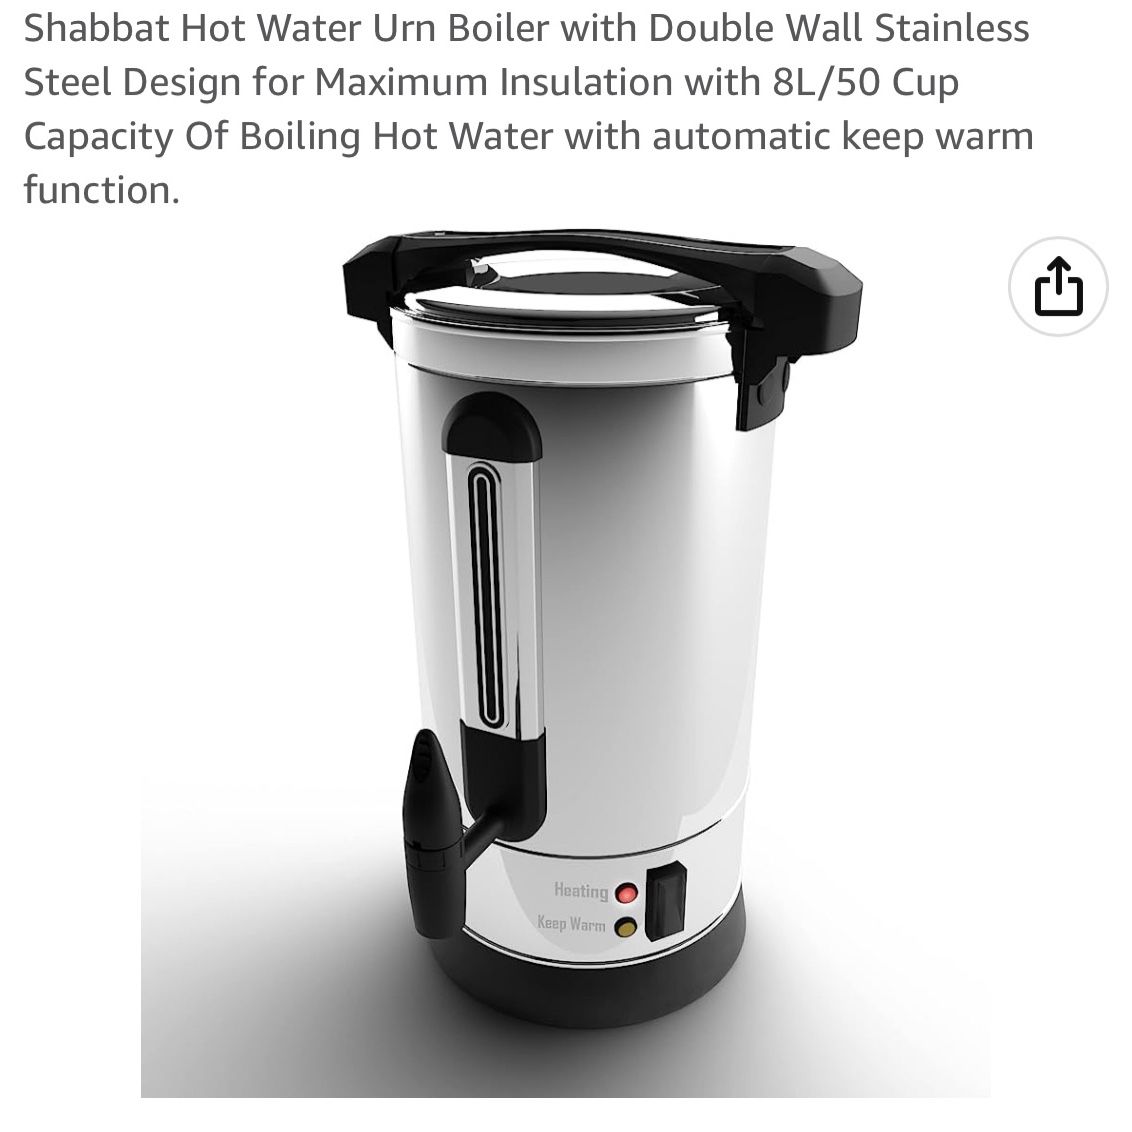 Shabbat Hot Water Urn Boiler with Double Wall Stainless Steel Design for  Maximum Insulation with 8L/50 Cup Capacity Of Boiling Hot Water with  automati for Sale in Las Vegas, NV - OfferUp